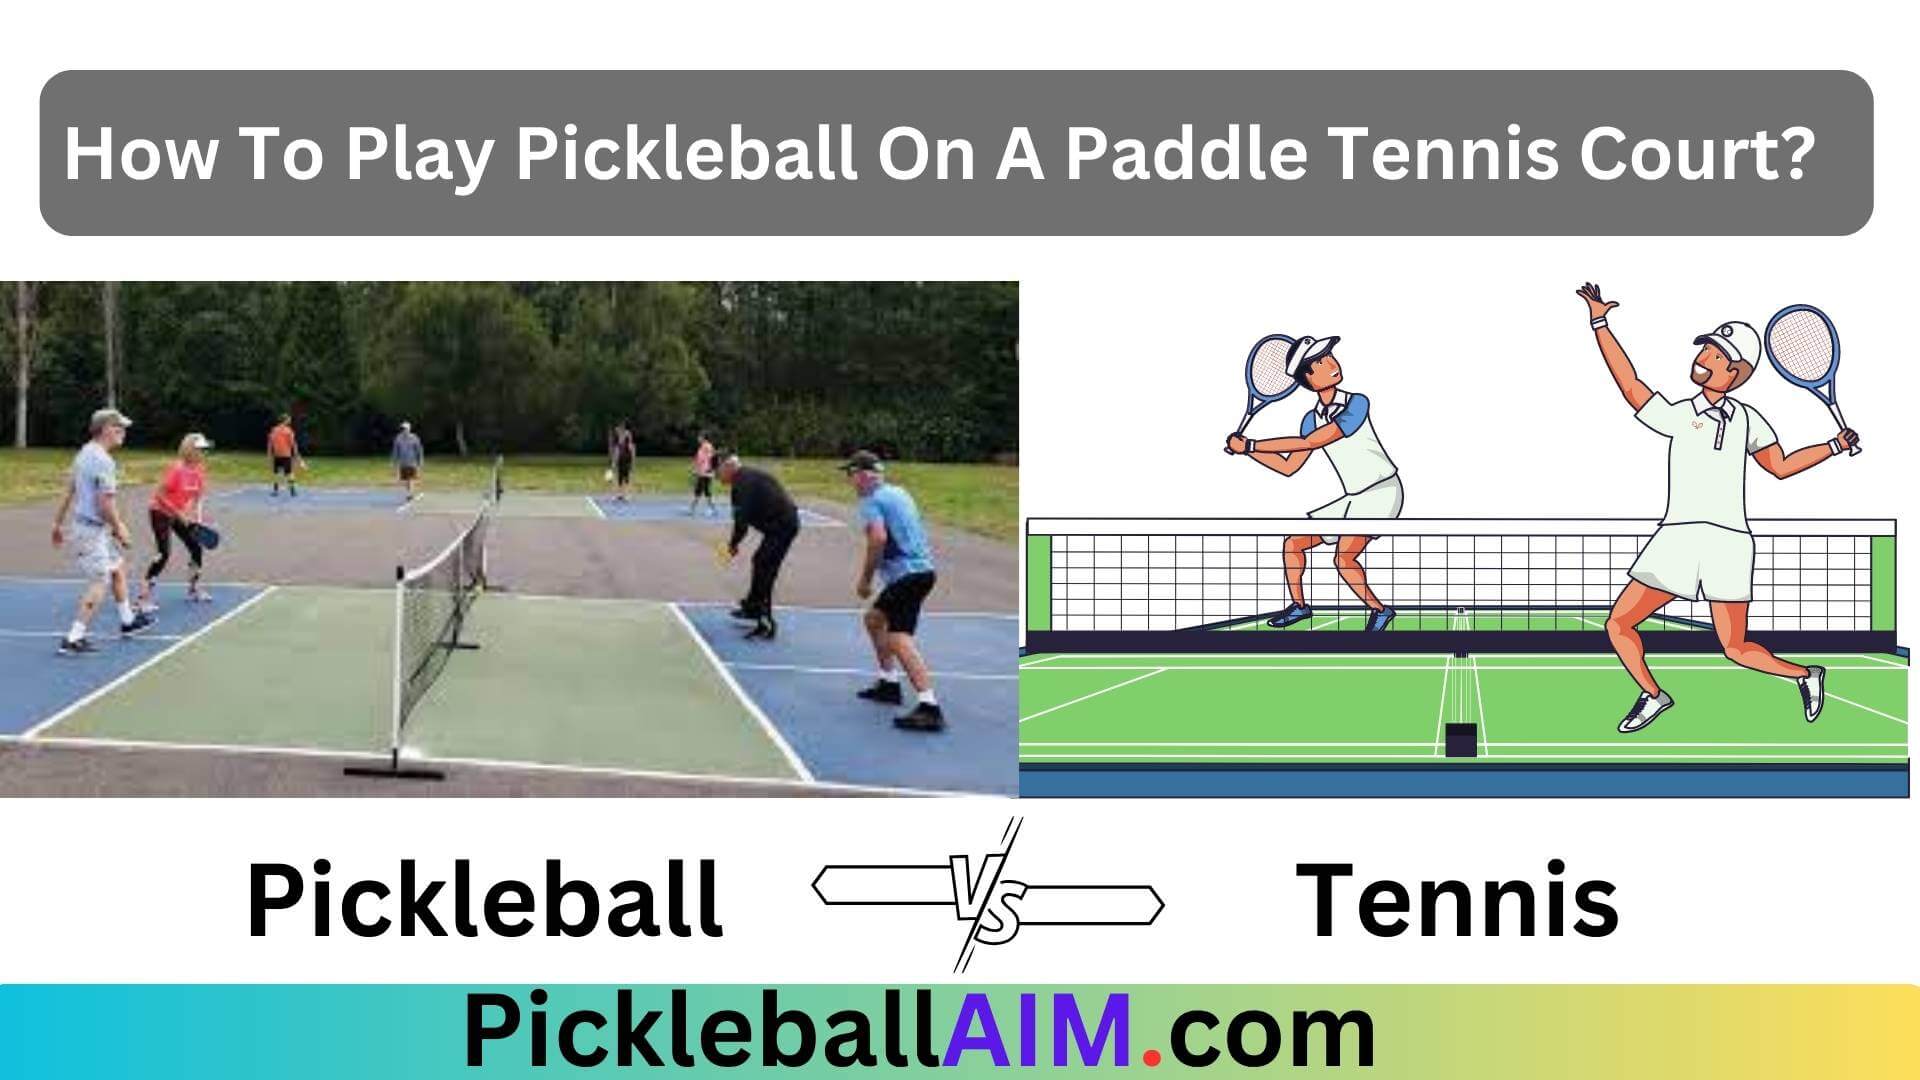 How To Play Pickleball On A Paddle Tennis Court